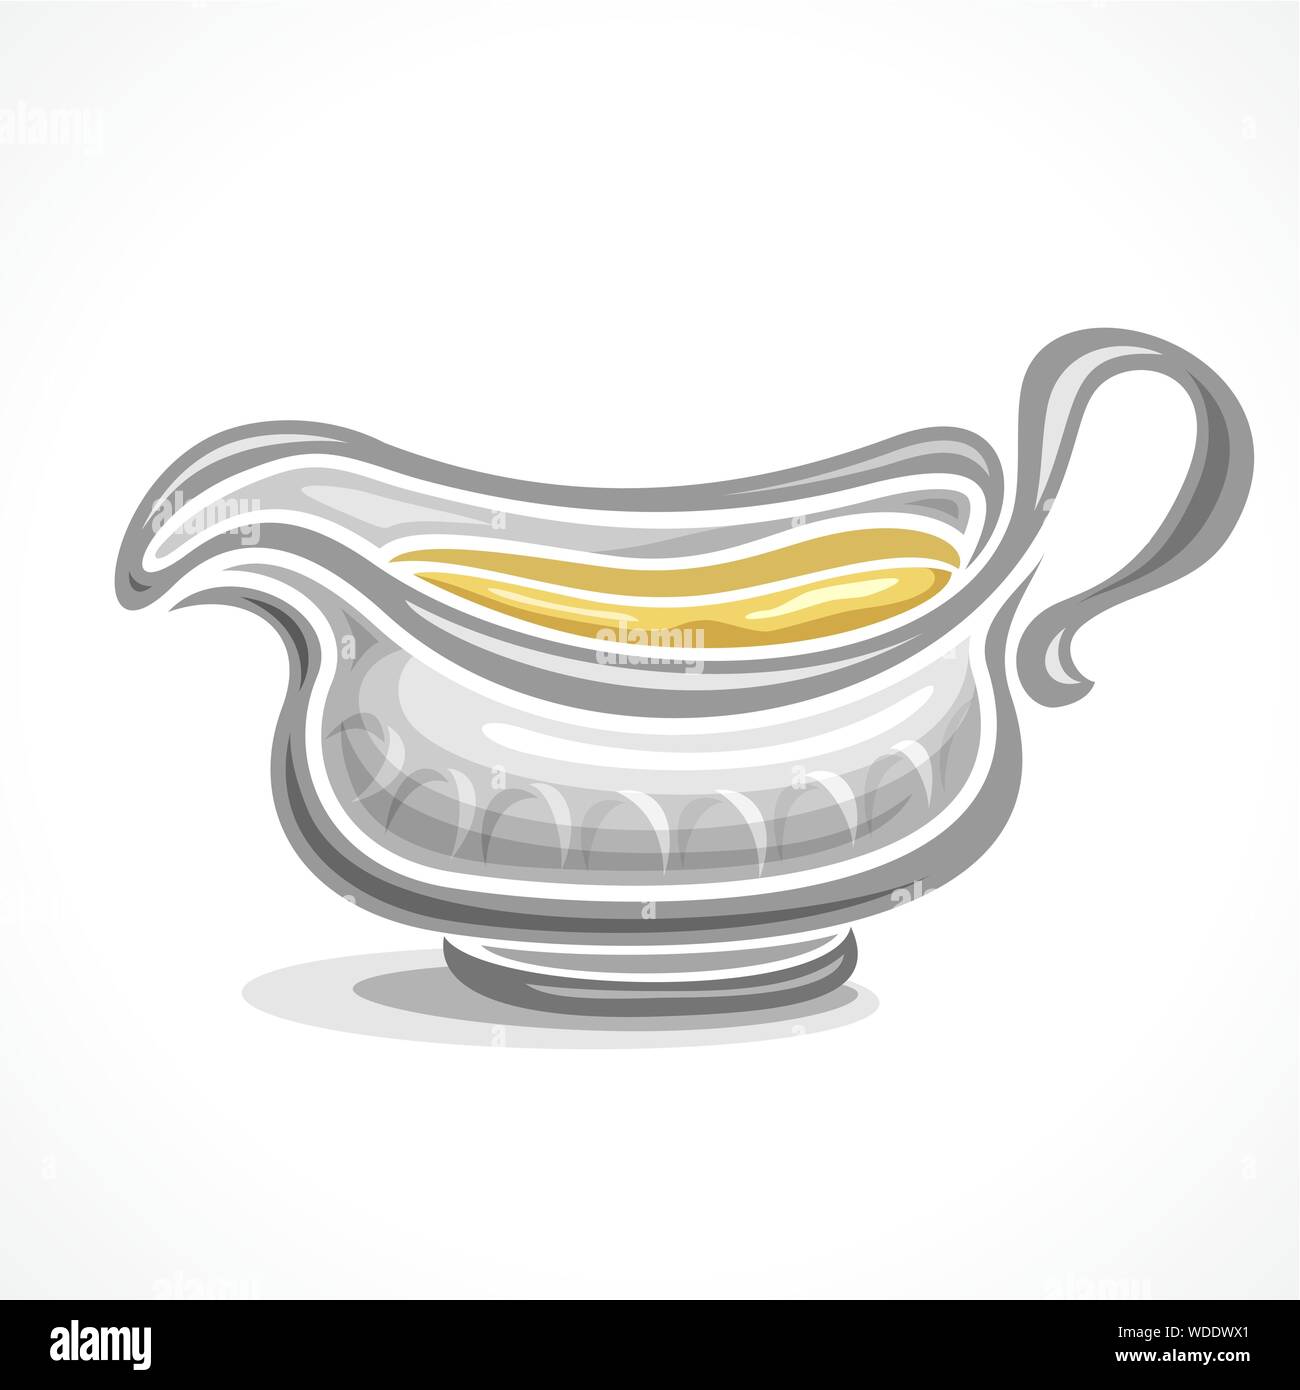 Vector ceramic gravy boat with handle, filled homemade yellow sauce isolated on white background. Stock Vector